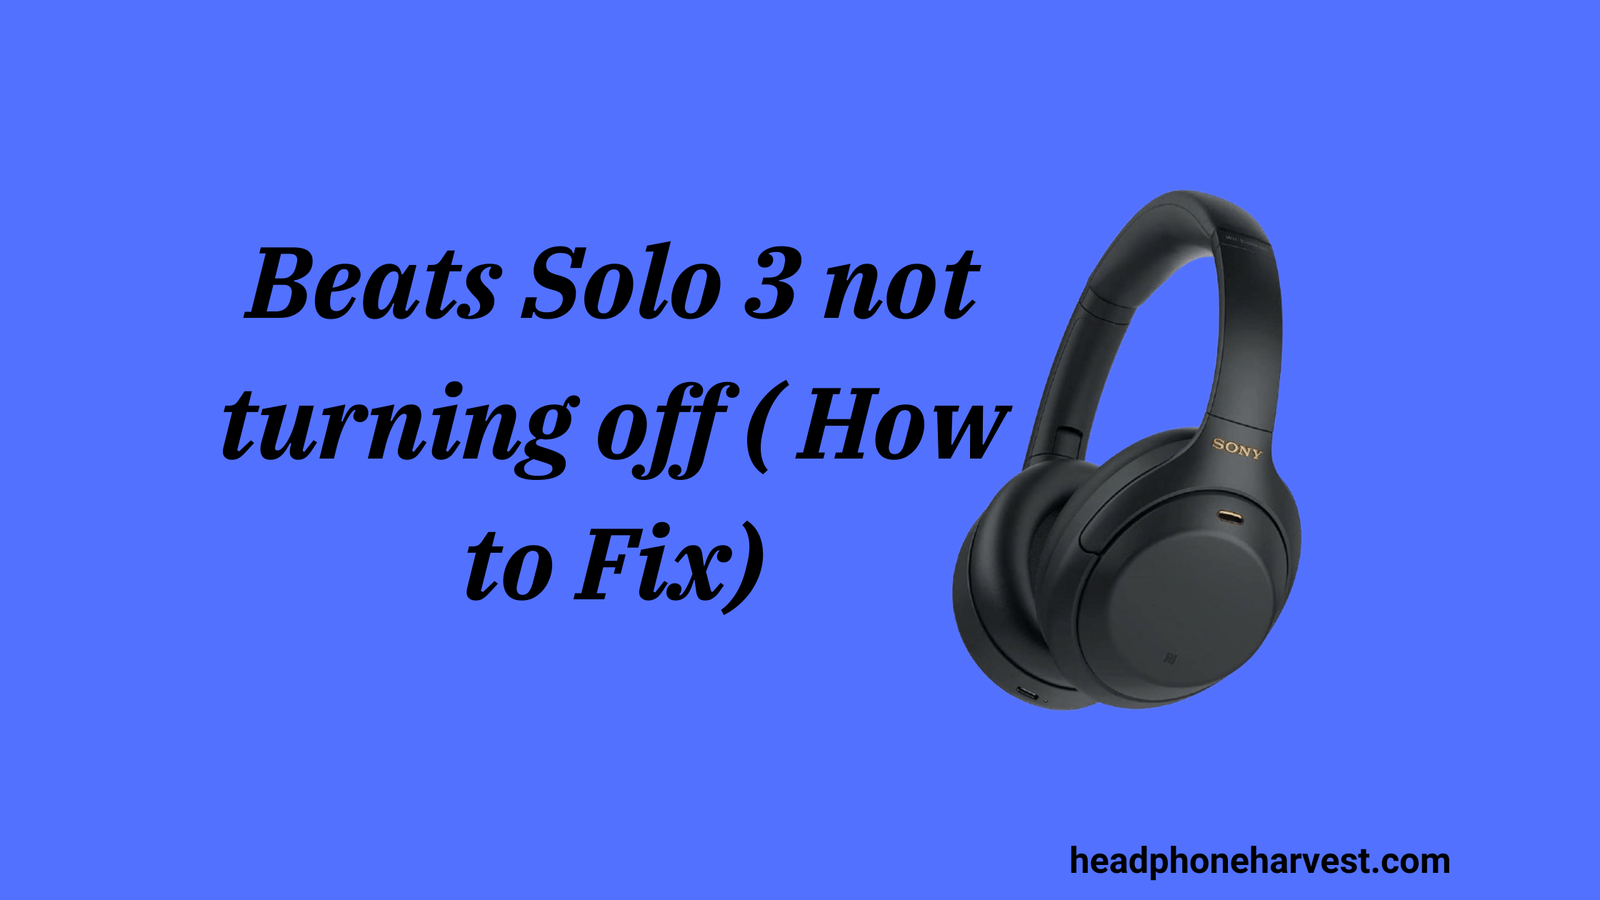 Beats Solo 3 not turning off